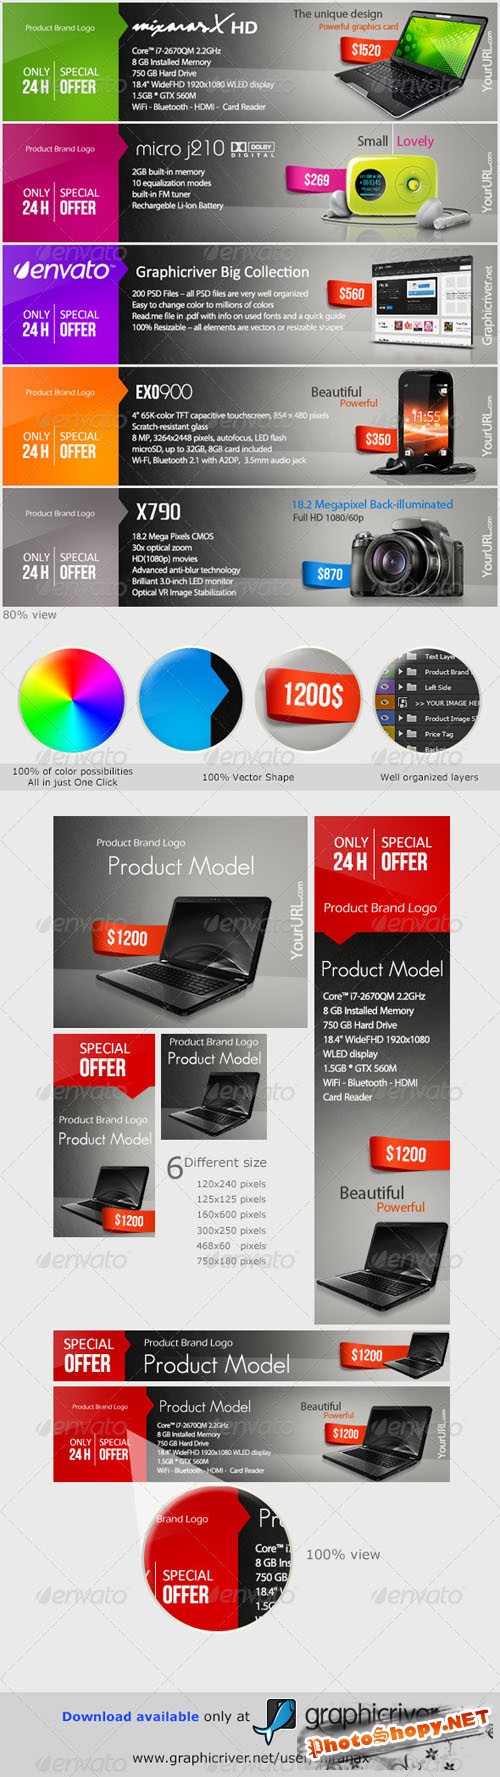 GraphicRiver - Web Marketing Banners & Advertise - PSD Templates 2772833